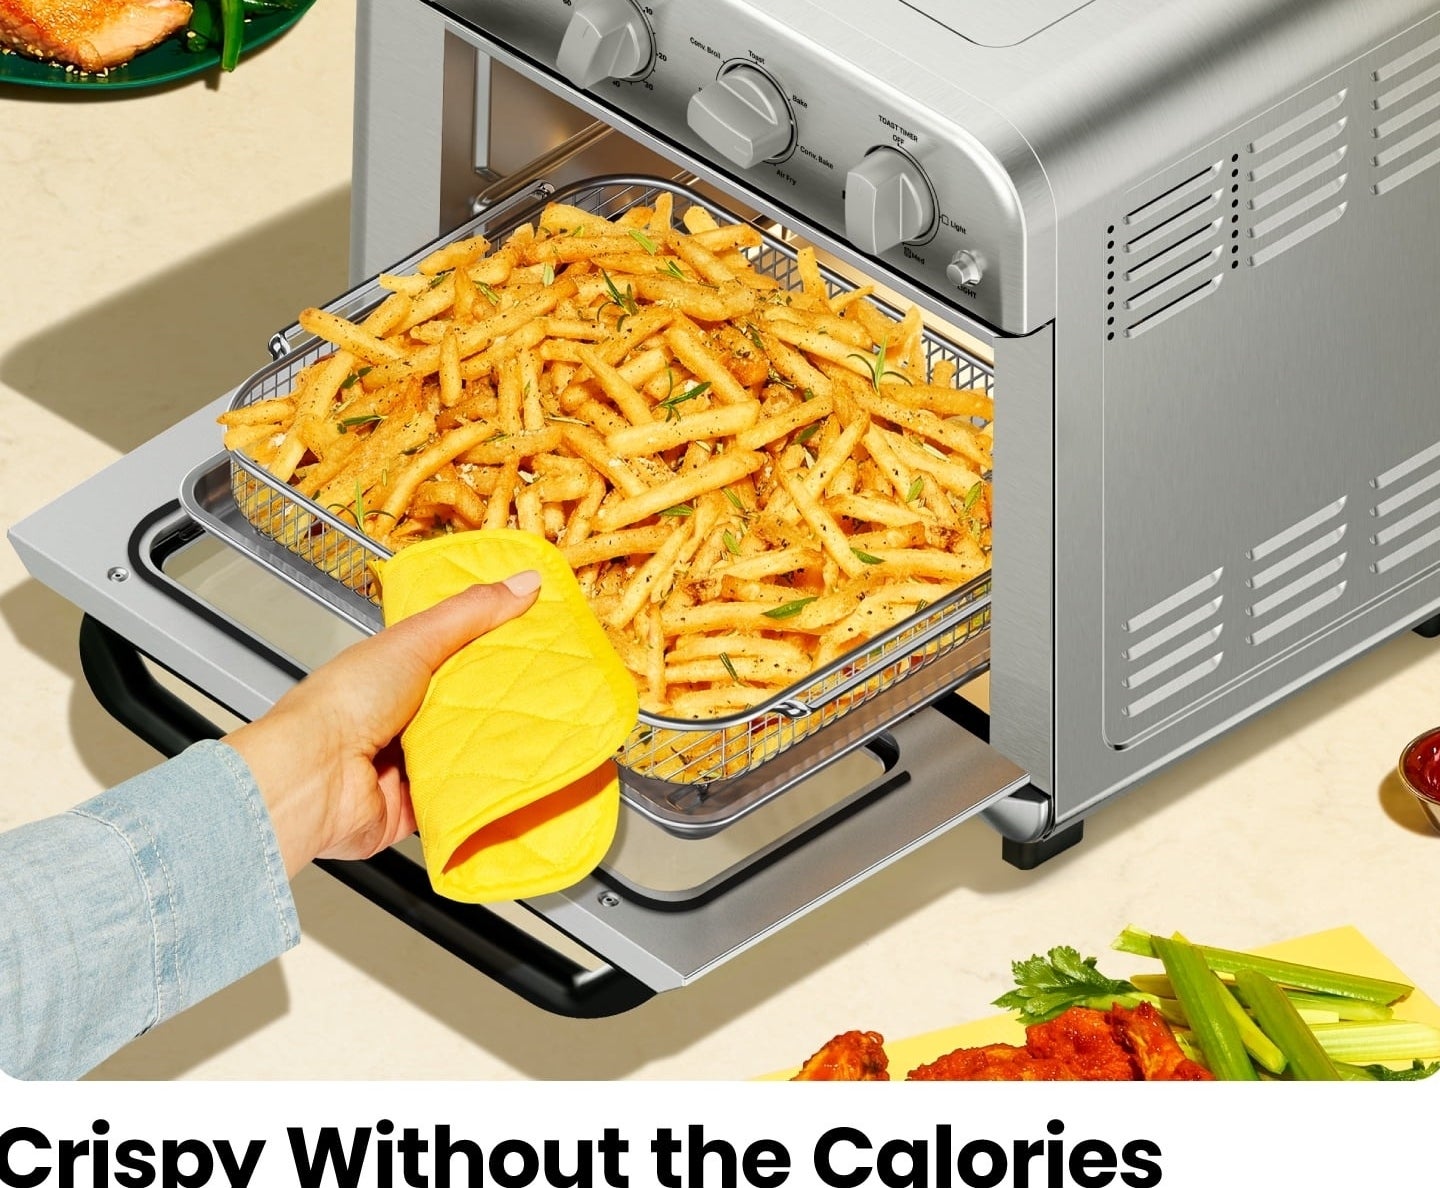 A hand pulls fries out of an air fryer